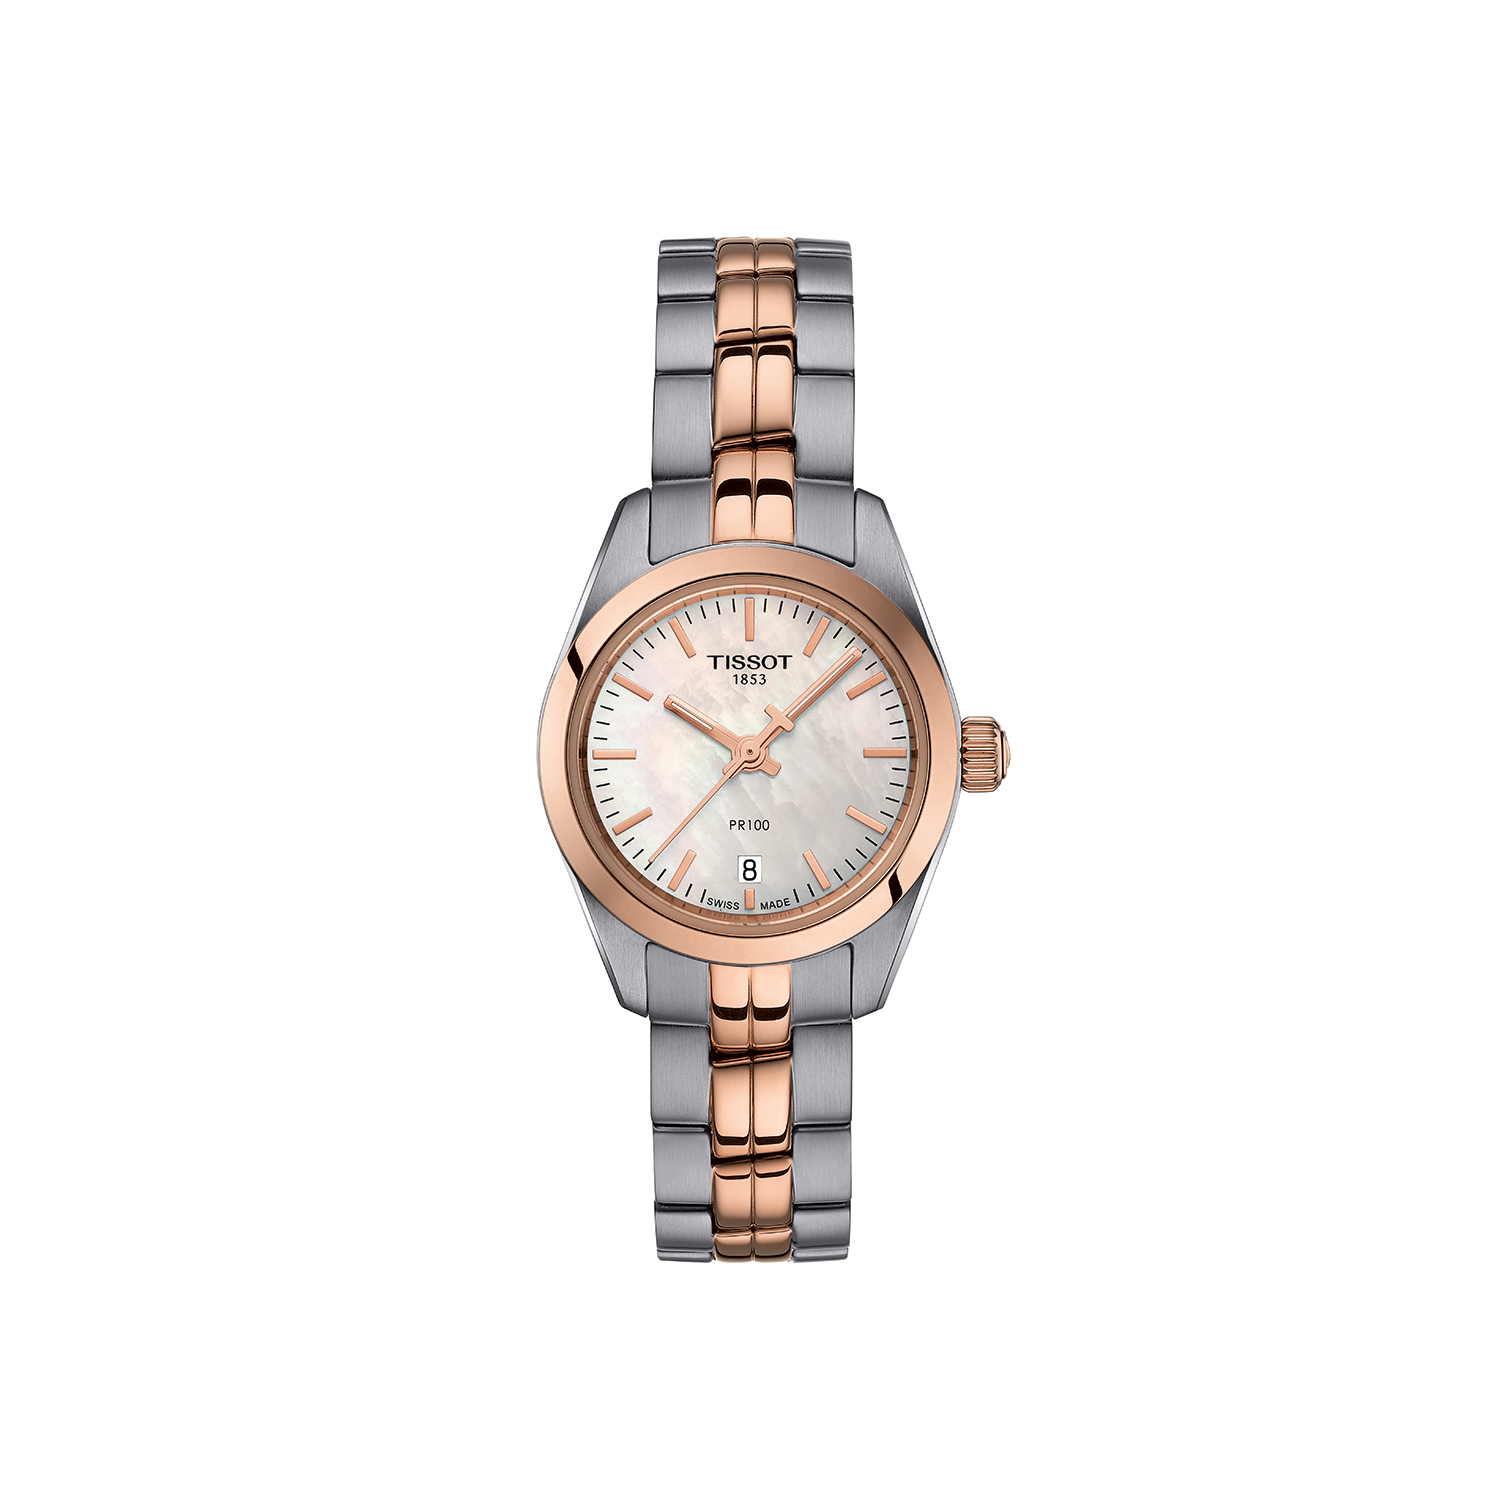 Tissot PR100 Lady Small Stainless Steel & Rose Gold Watch